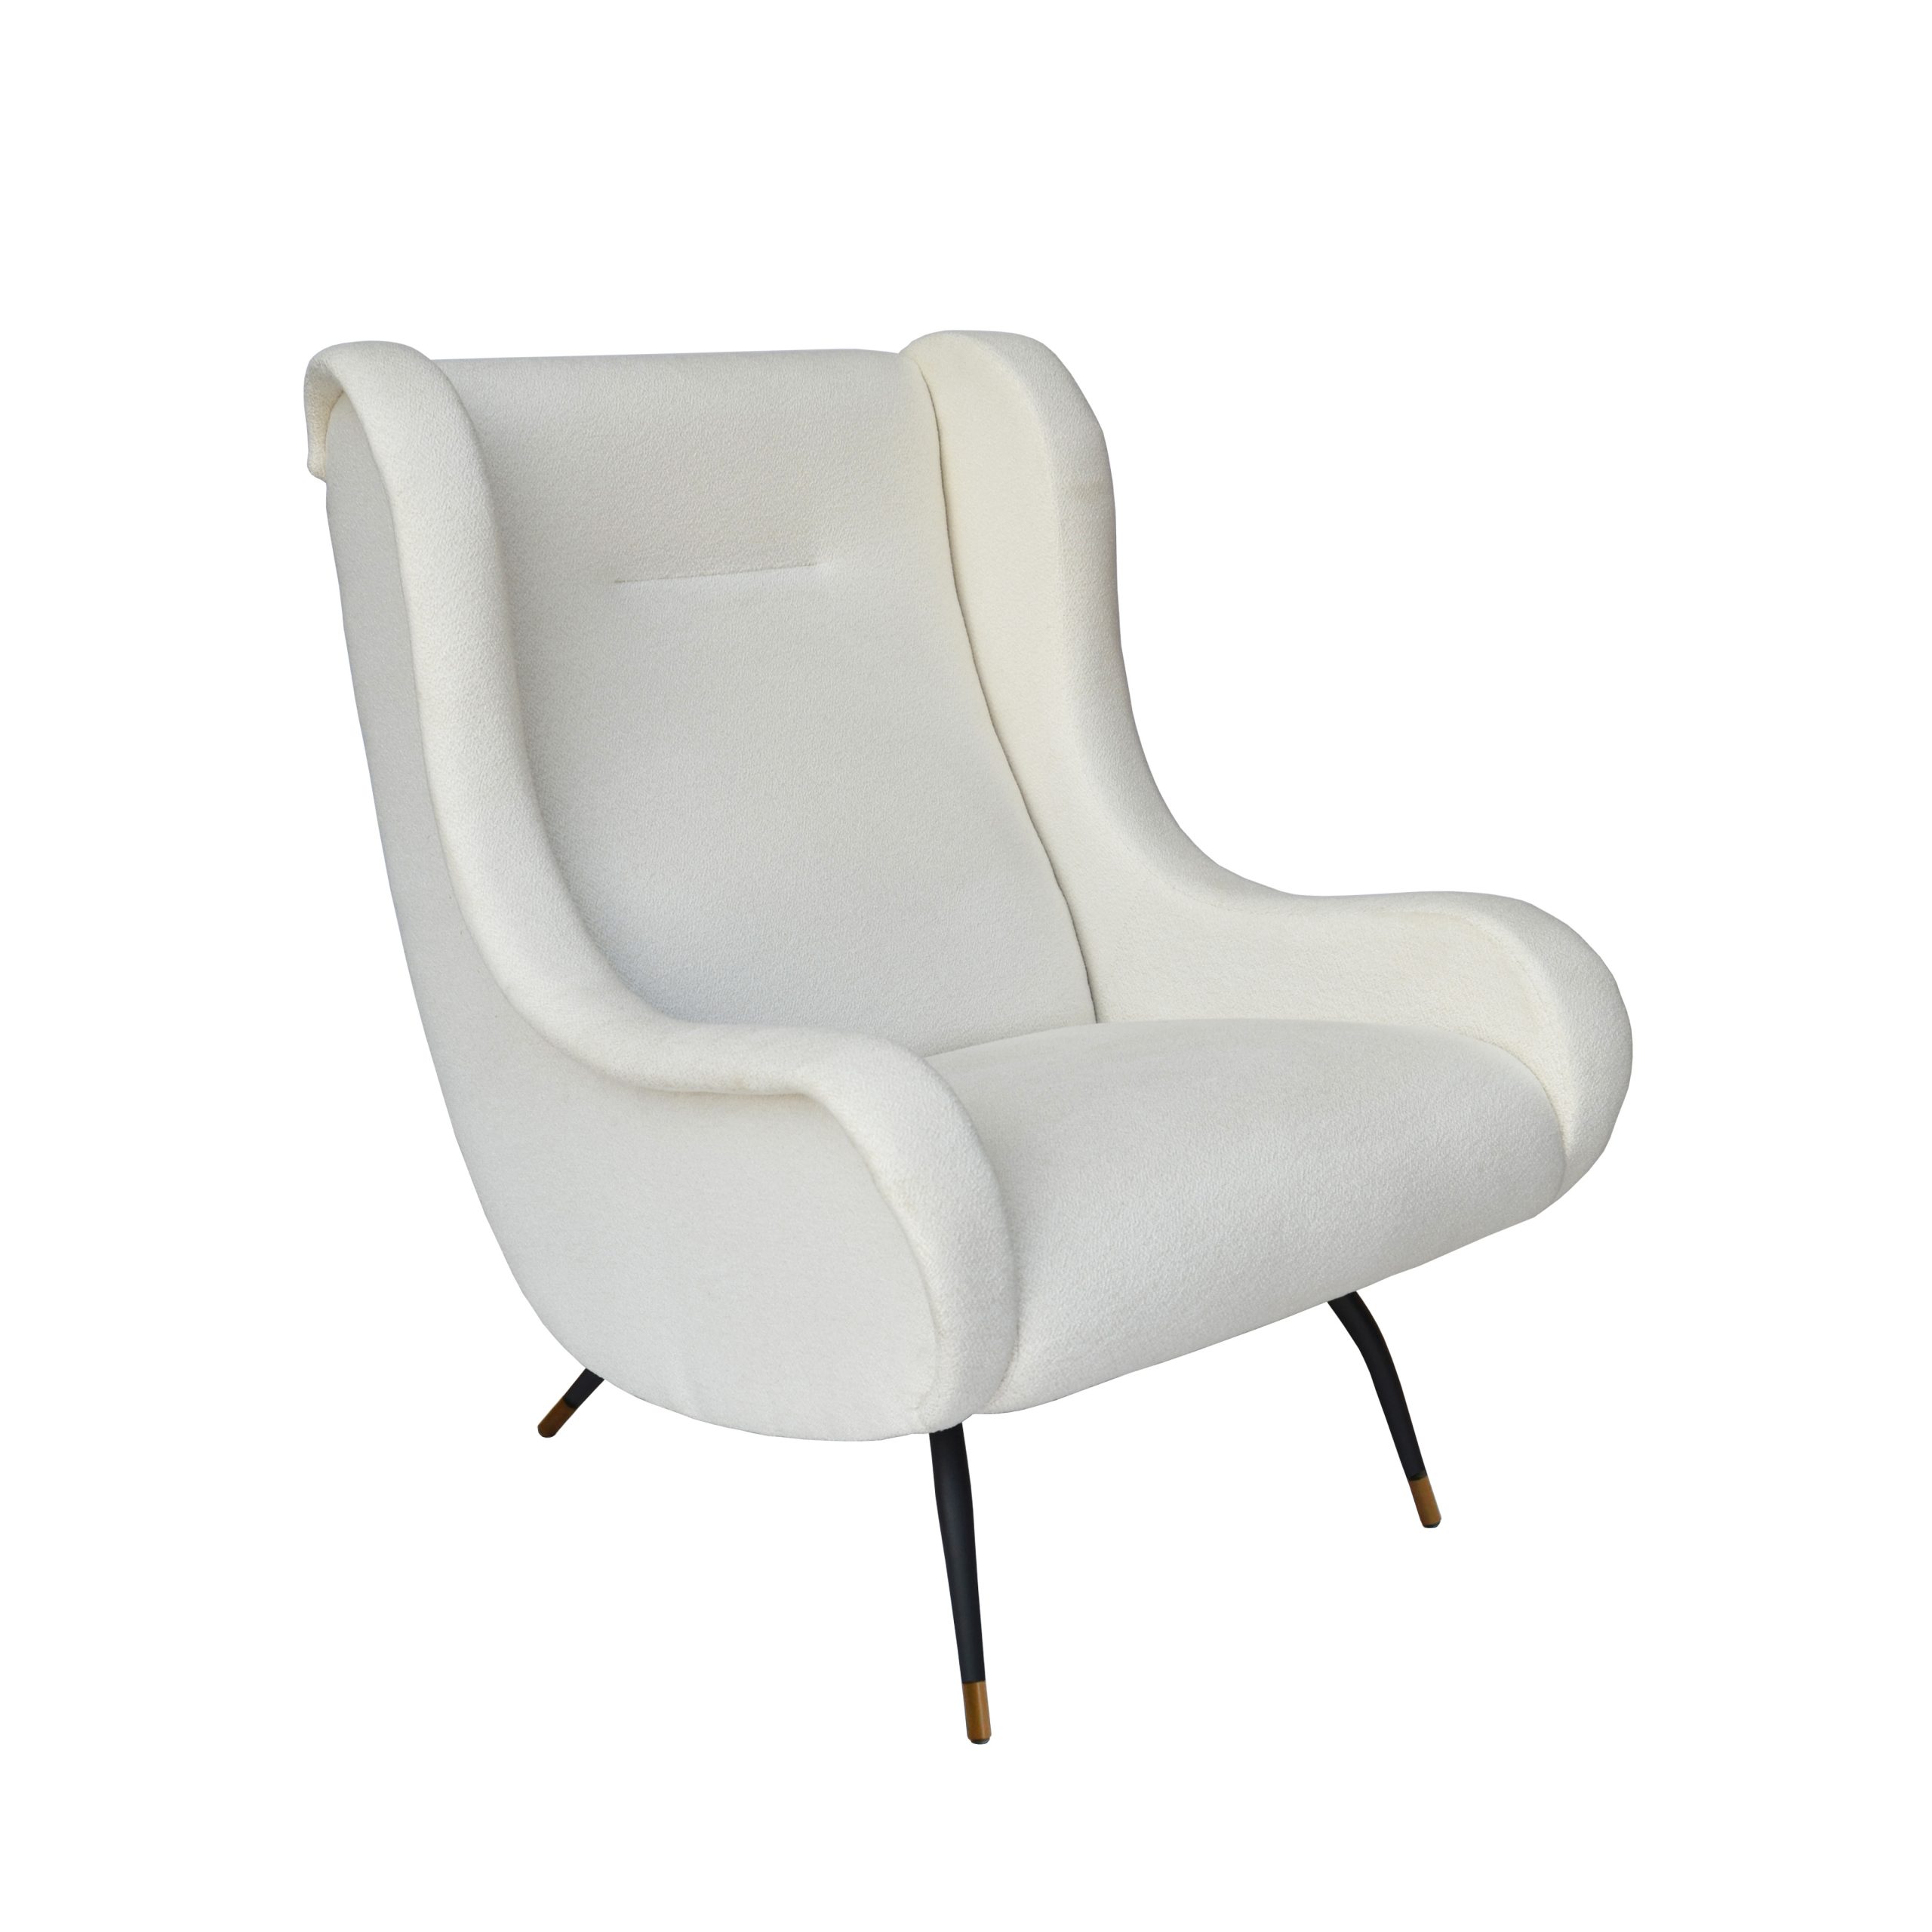 Verona Occasional Chair – 98H/74W/88D